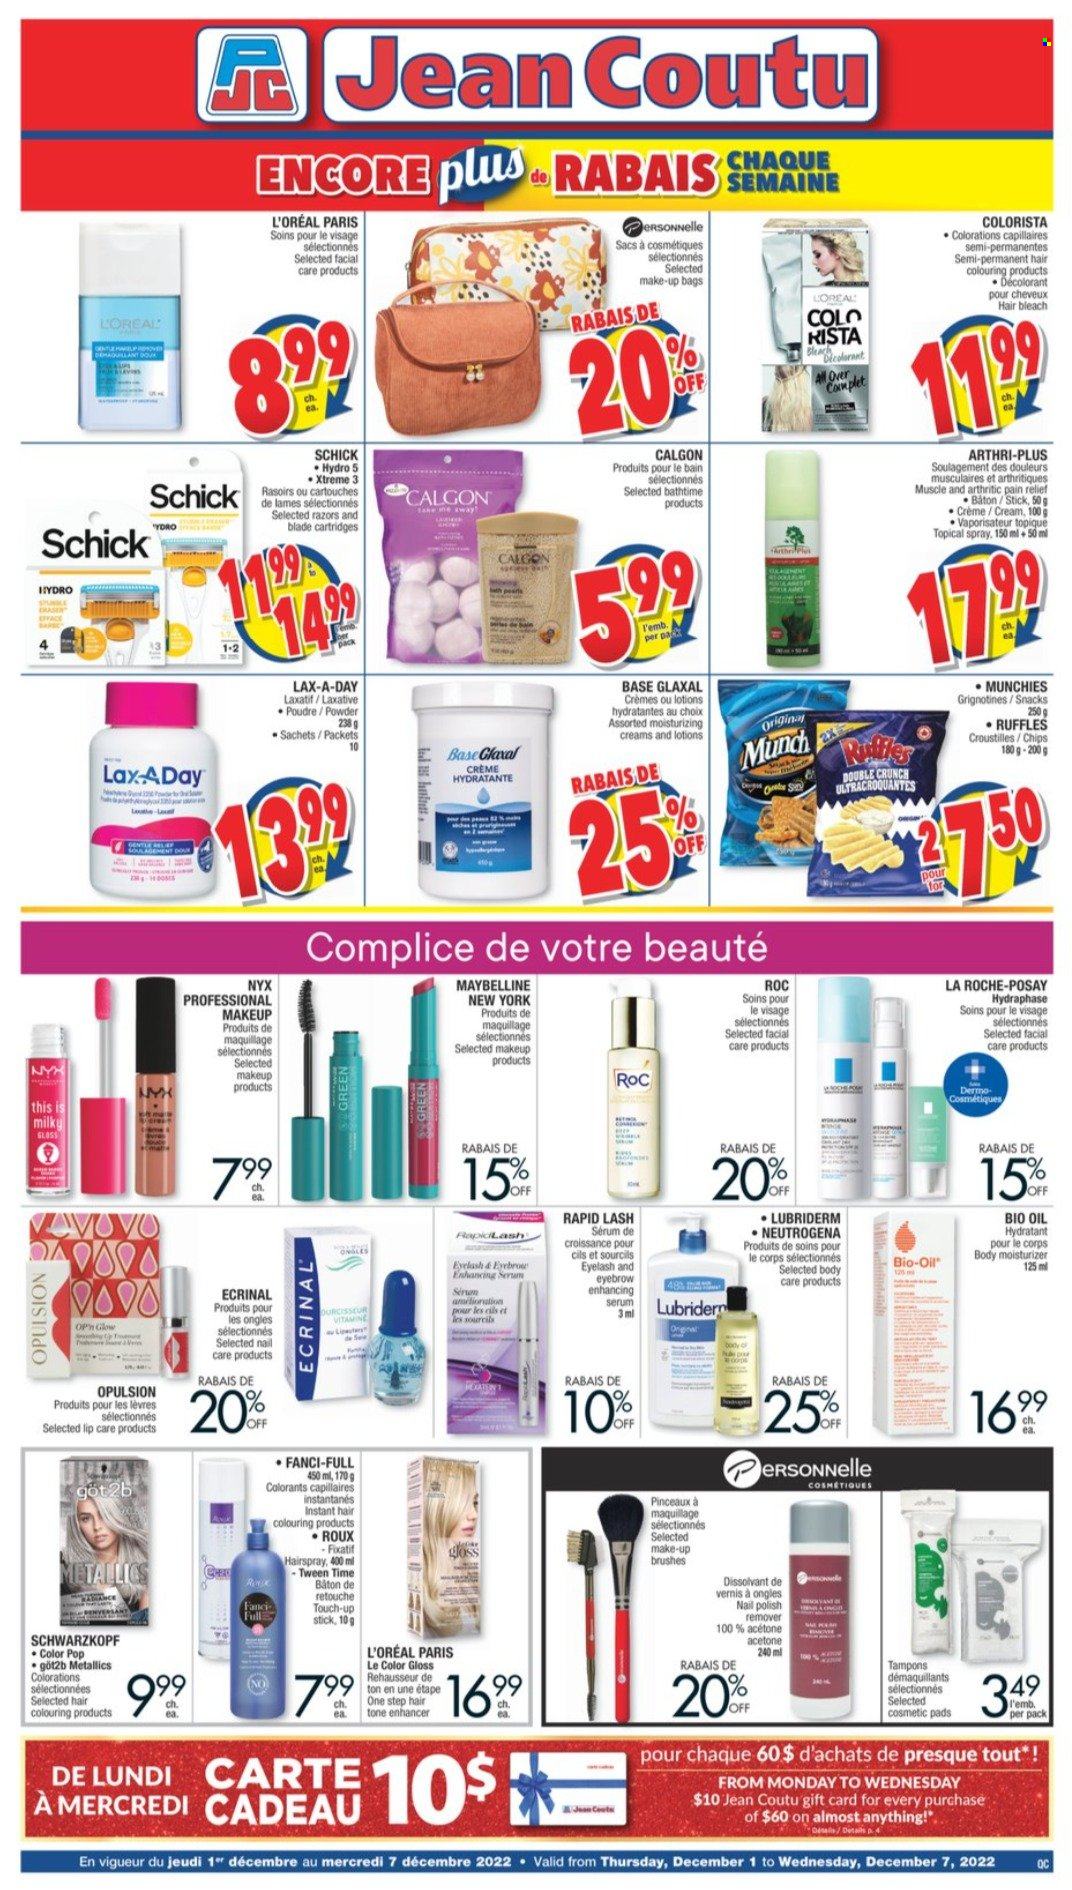 thumbnail - Jean Coutu Flyer - December 01, 2022 - December 07, 2022 - Sales products - chips, Ruffles, oil, bleach, tampons, L’Oréal, La Roche-Posay, moisturizer, serum, NYX Cosmetics, Lubriderm, Schick, bag, nail polish remover, makeup, Maybelline, pain relief, laxative, Neutrogena, Schwarzkopf. Page 1.